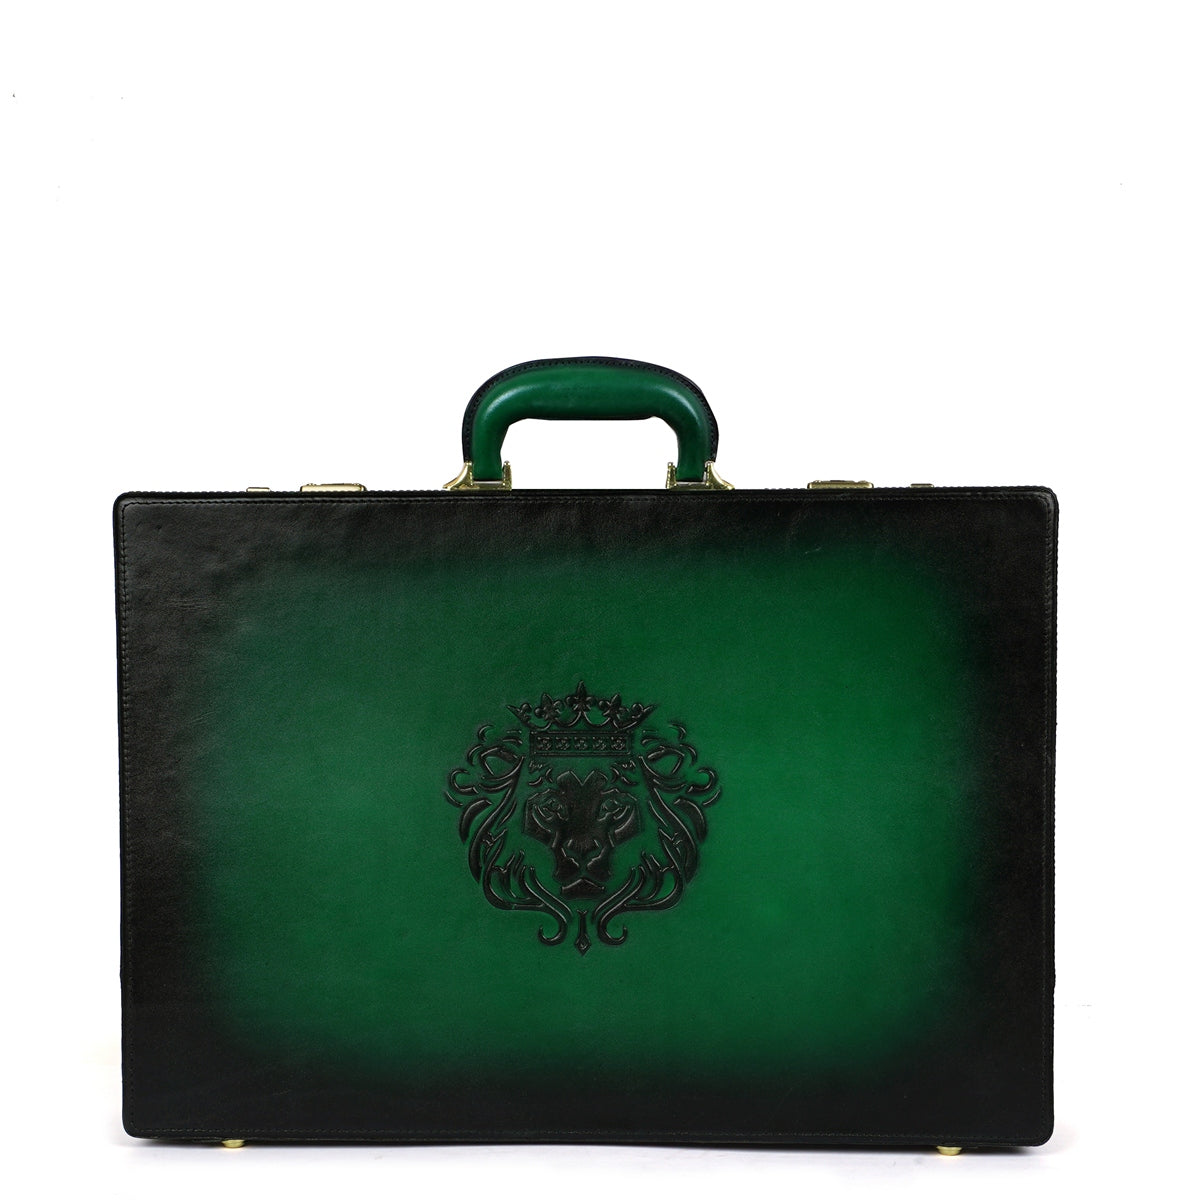 Buy Pure Laptop Leather Bags For Men @ Best Price - Voganow